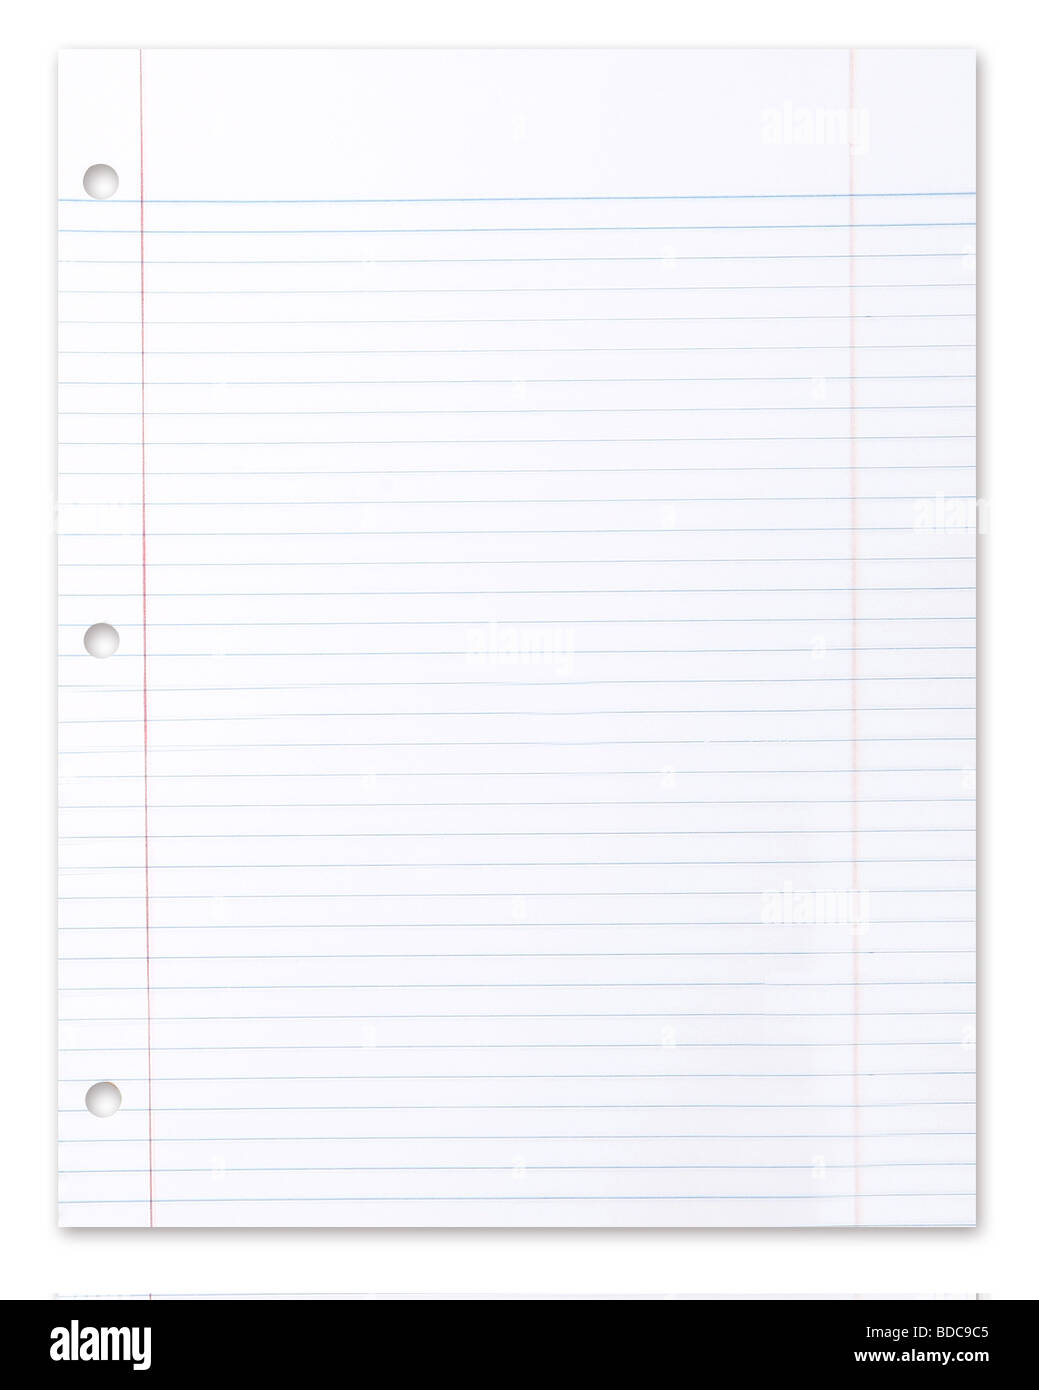 Blank Piece of School Lined Paper on White With a Drop Shadow Stock Photo